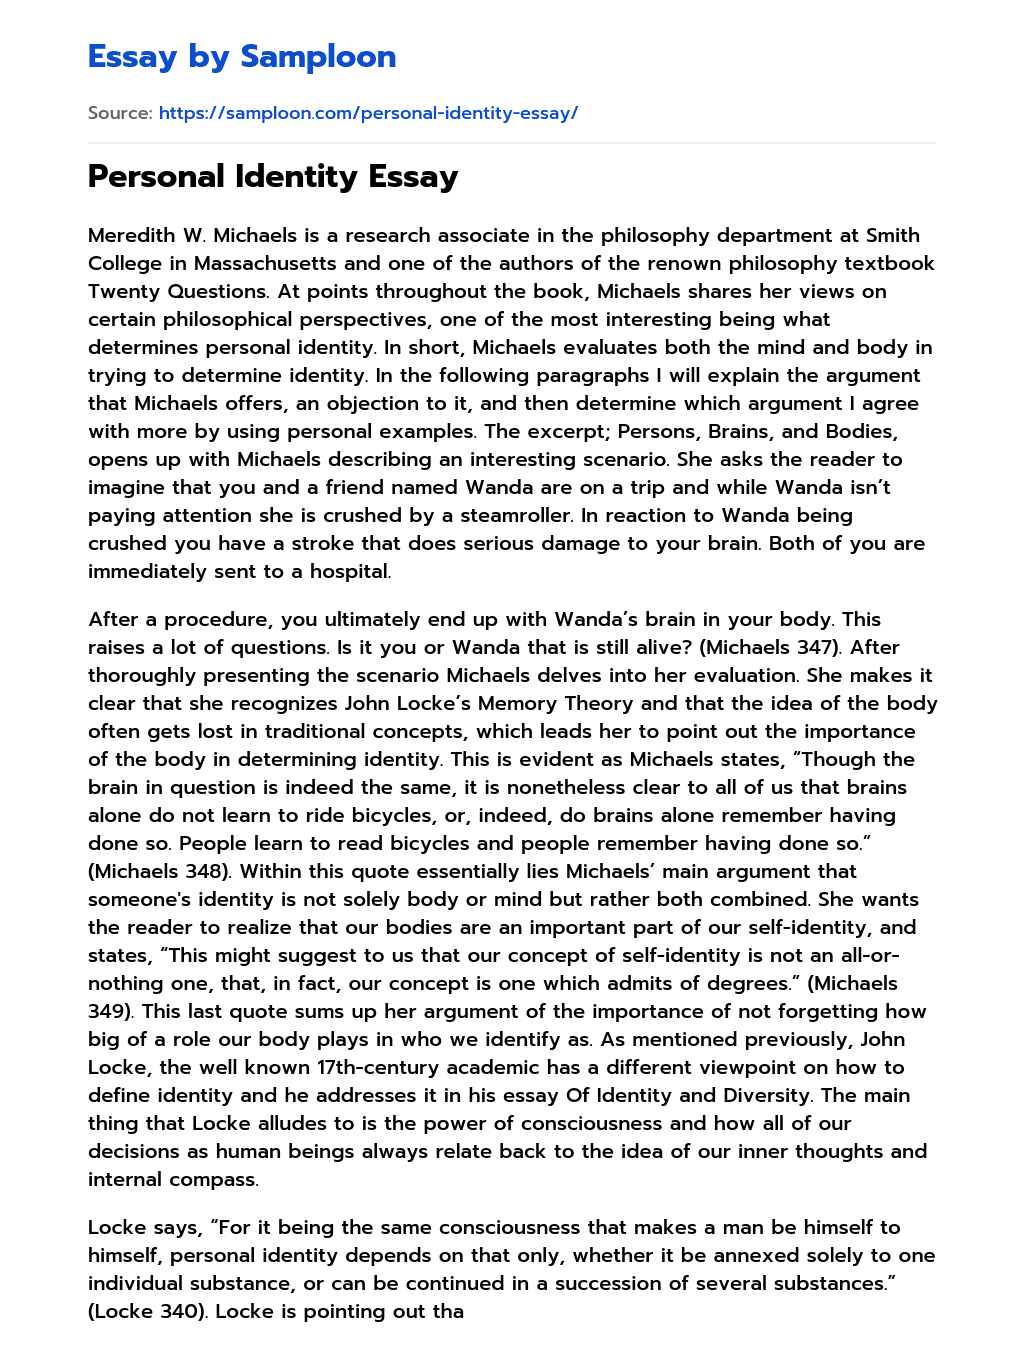 5 paragraph essay about identity